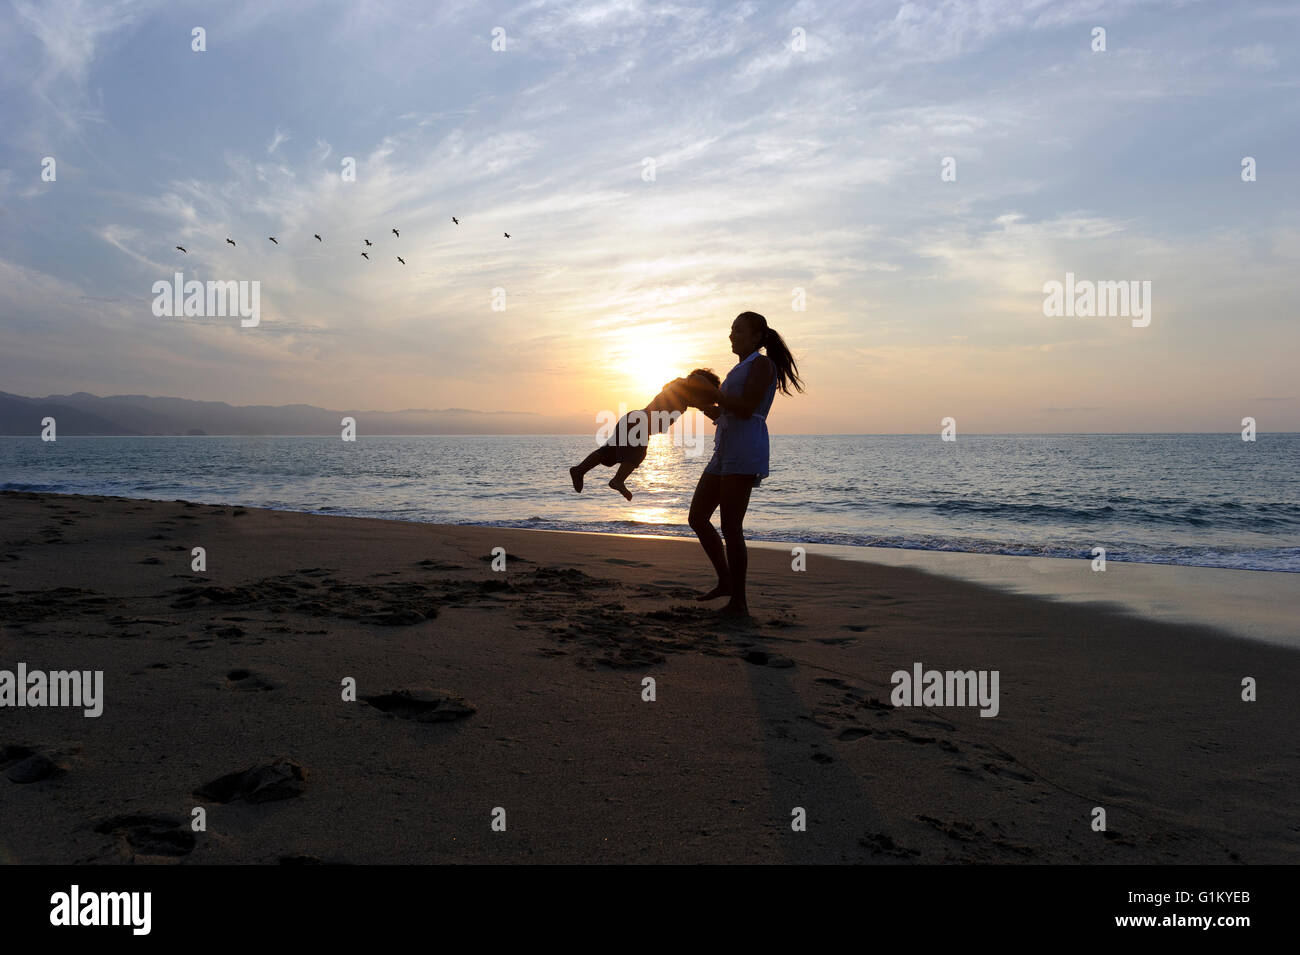 Mother son is a mother happily playing with her son as she swings him around on the beach as birds fly by in a sunset sky. Stock Photo